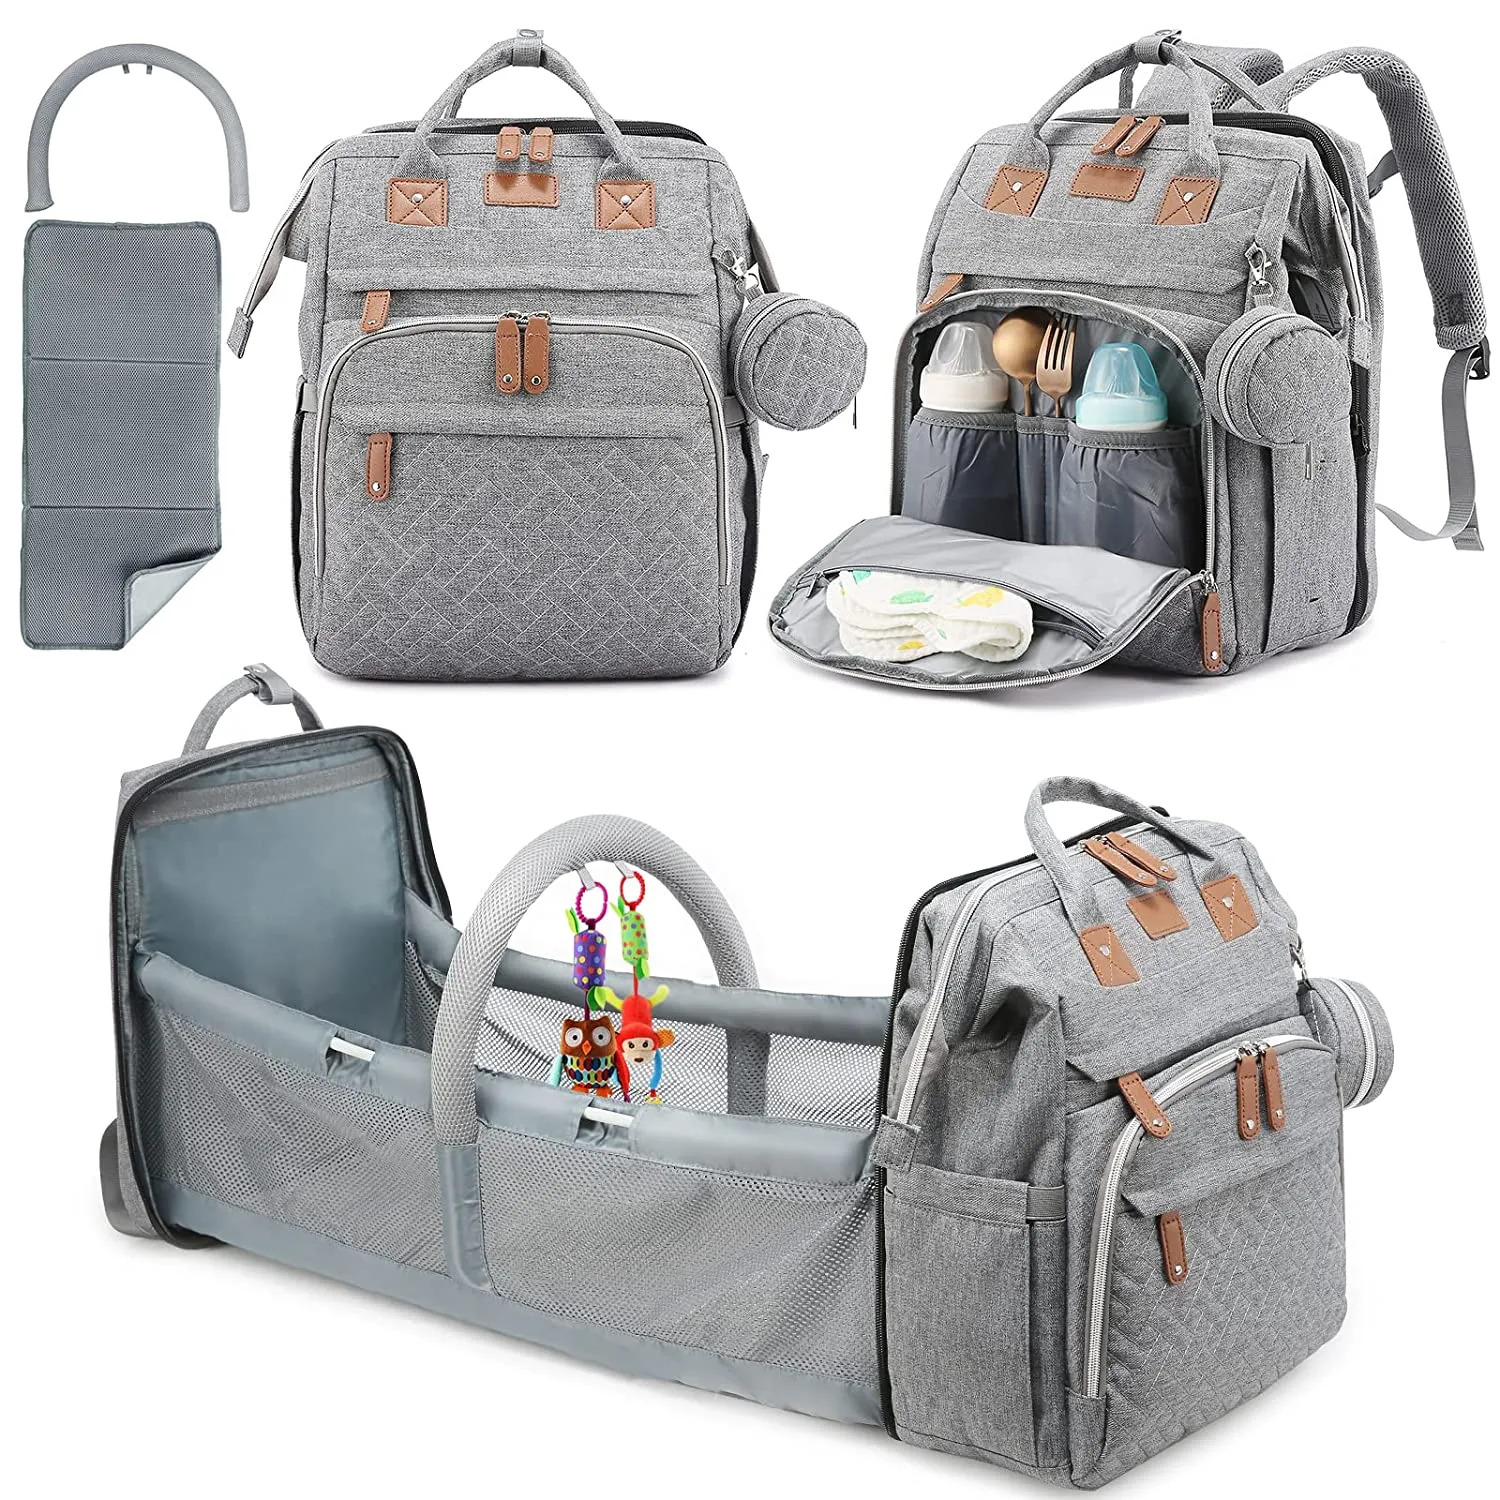 5 in 1 Diaper Bag and Baby Portable Changing Table Waterproof Mommy Diaper Bag Backpack for Outdoor Travel